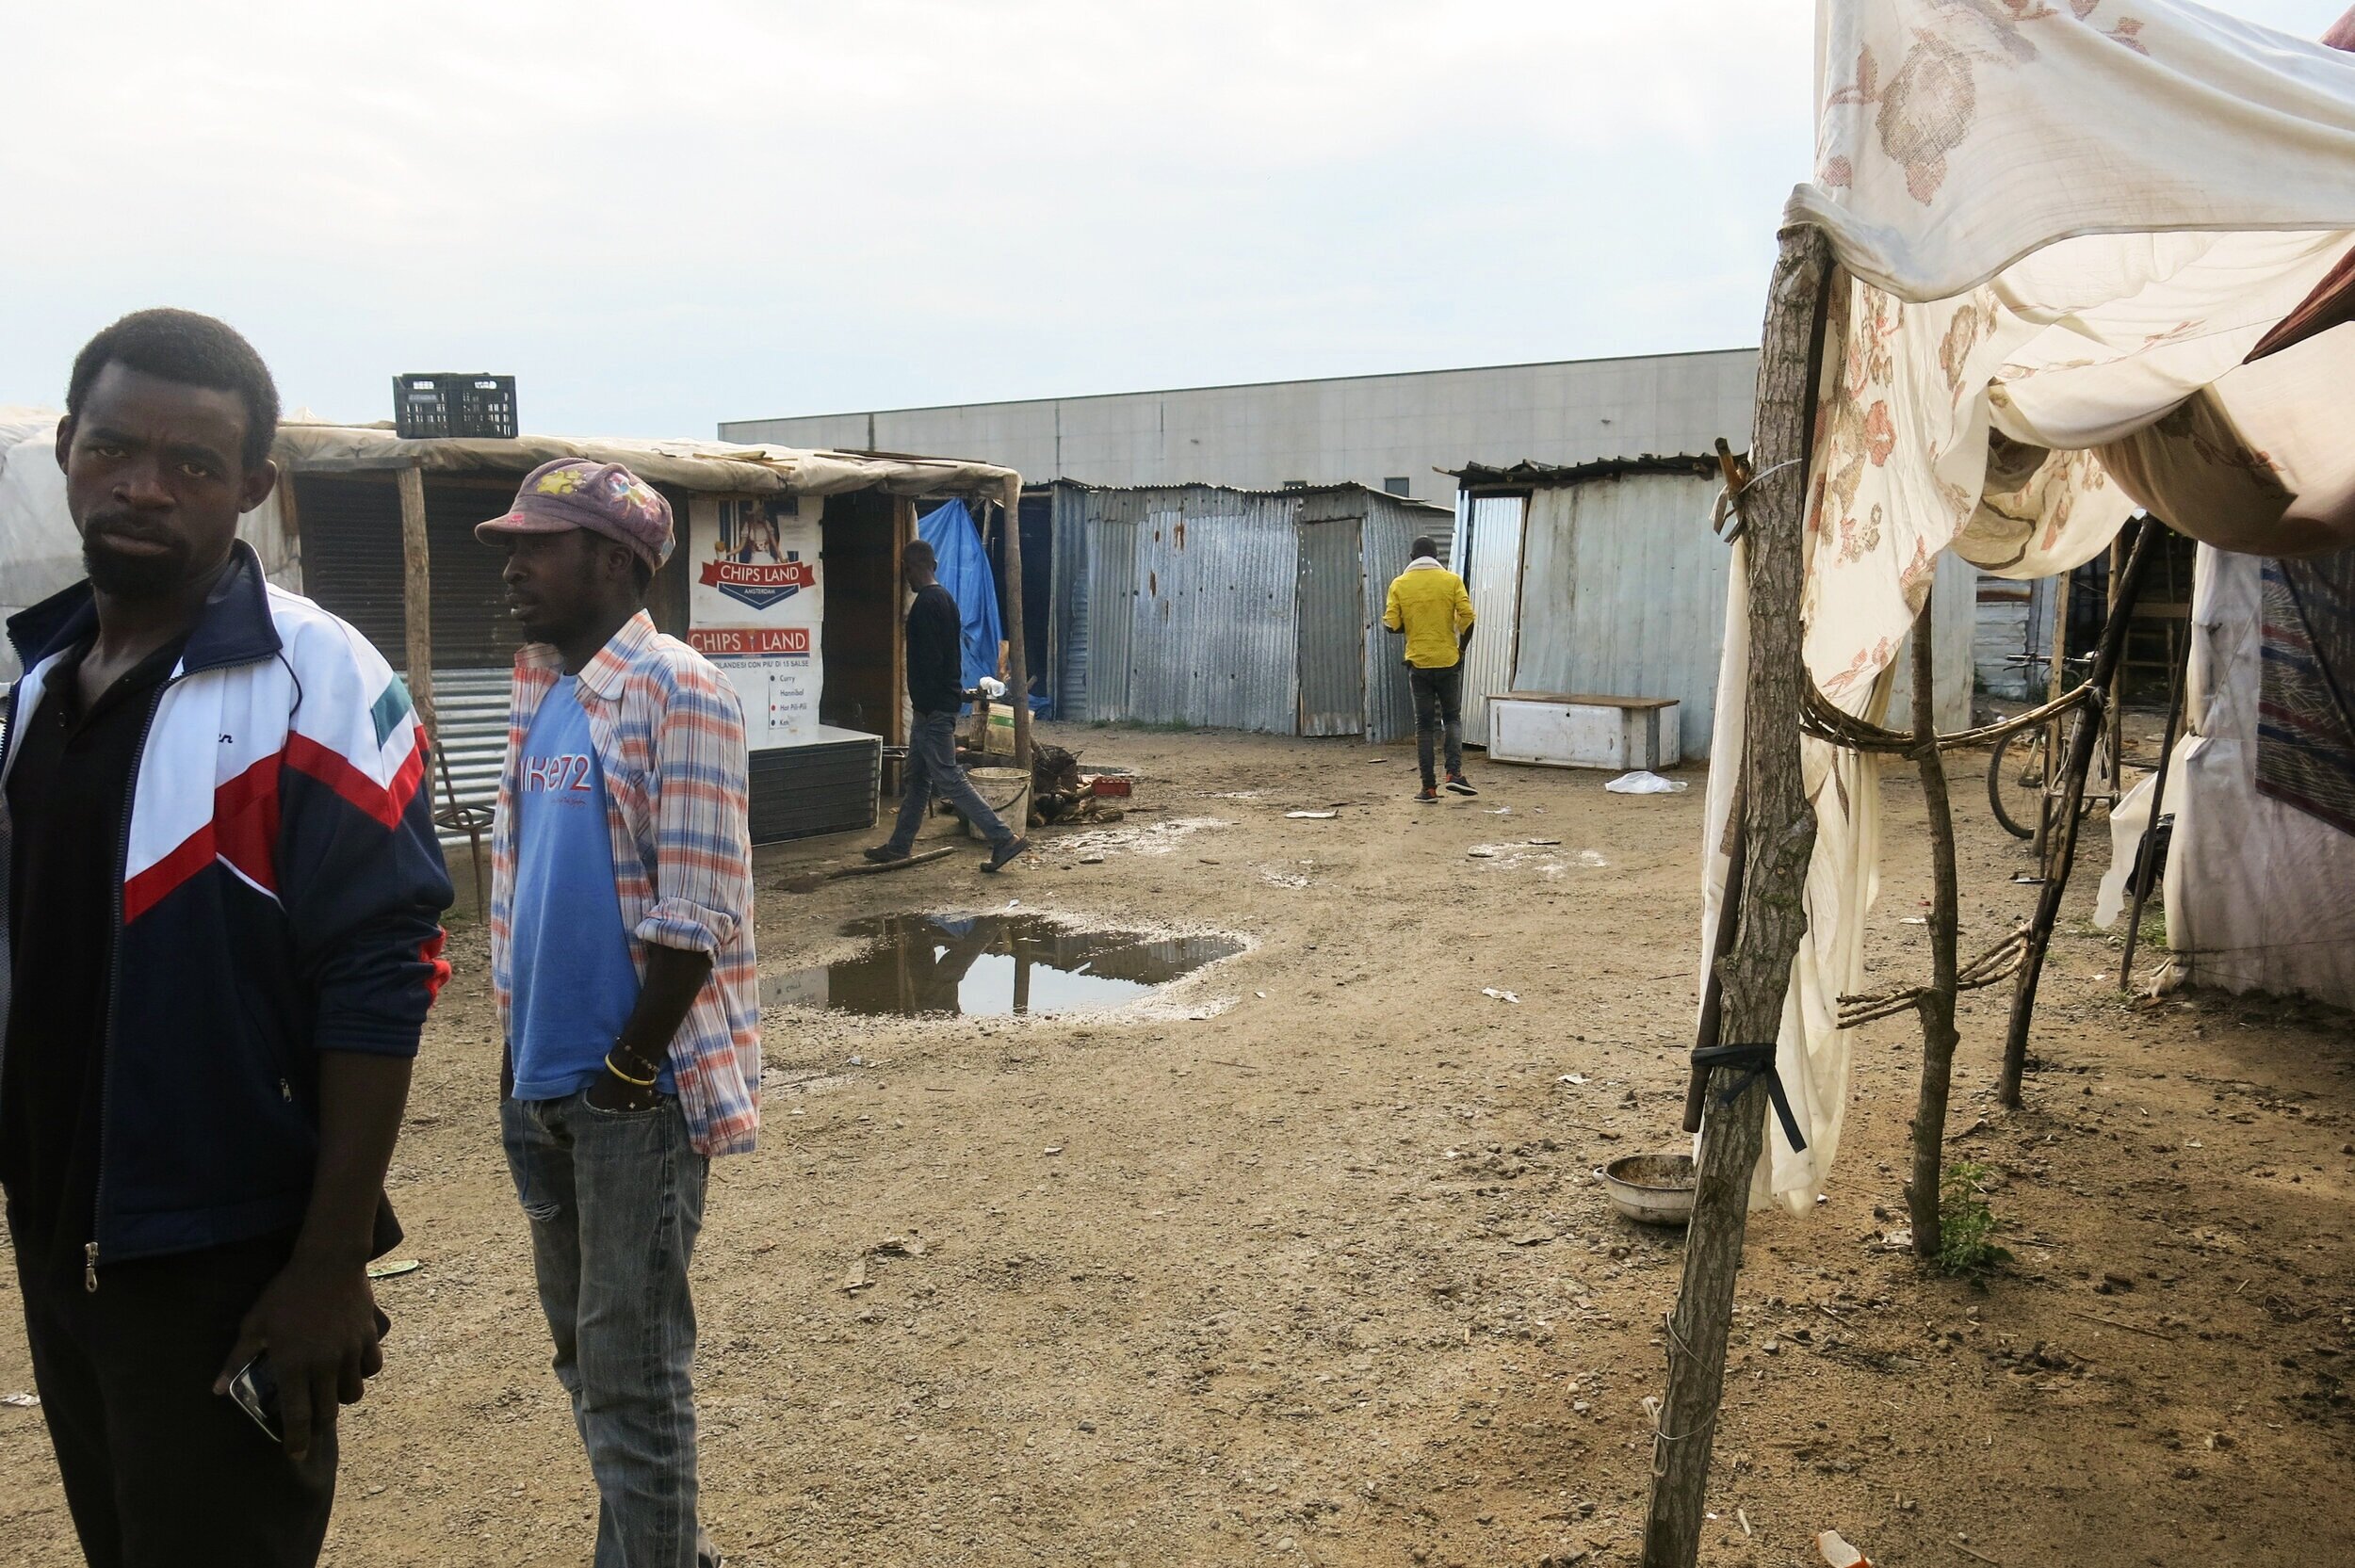  Migrant agricultural worker are seen in the former shantytown of San Ferdinando, near the infamous Rosarno mafia stronghold. The informal settlement was shut down in 2019, but similar camps have recently emerged in the area. 